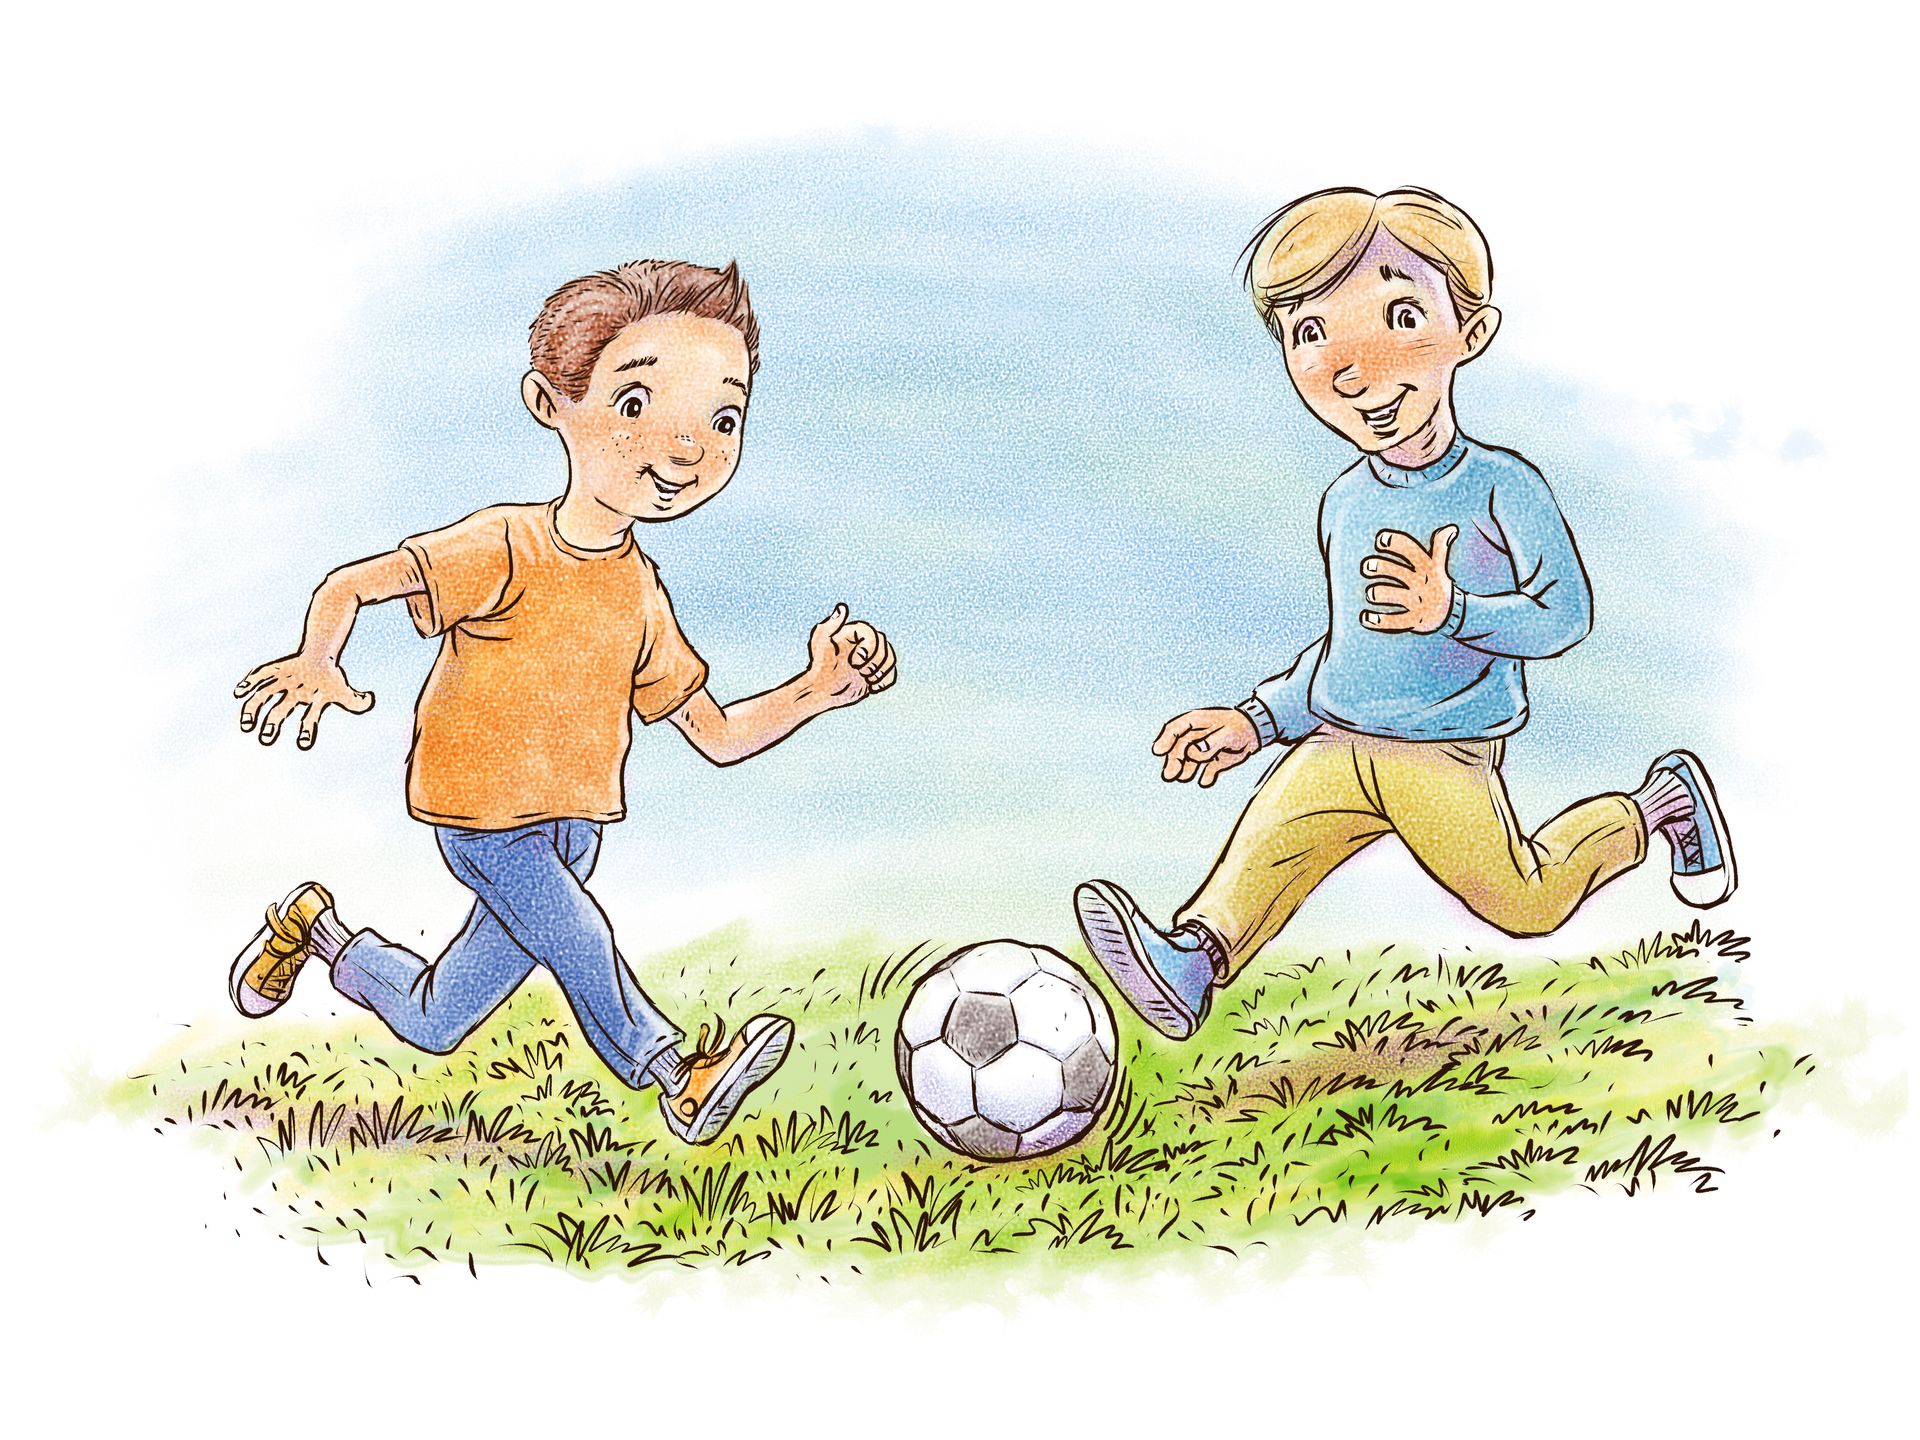 Two boys play together with a soccer ball.